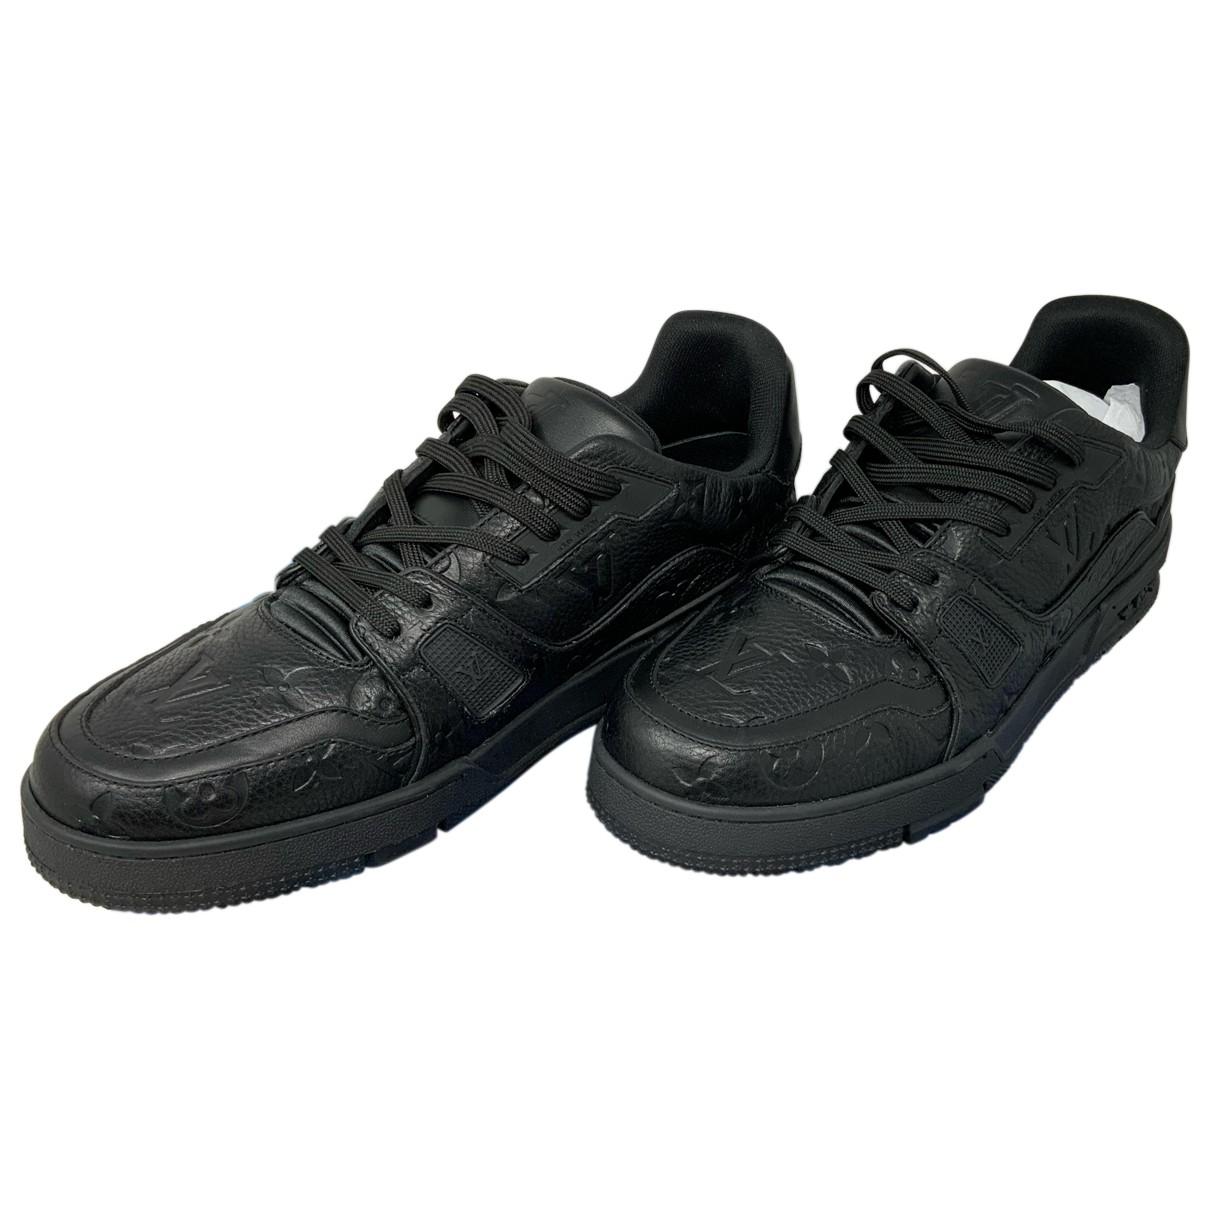 Lv trainer leather low trainers Louis Vuitton Black size 11 UK in